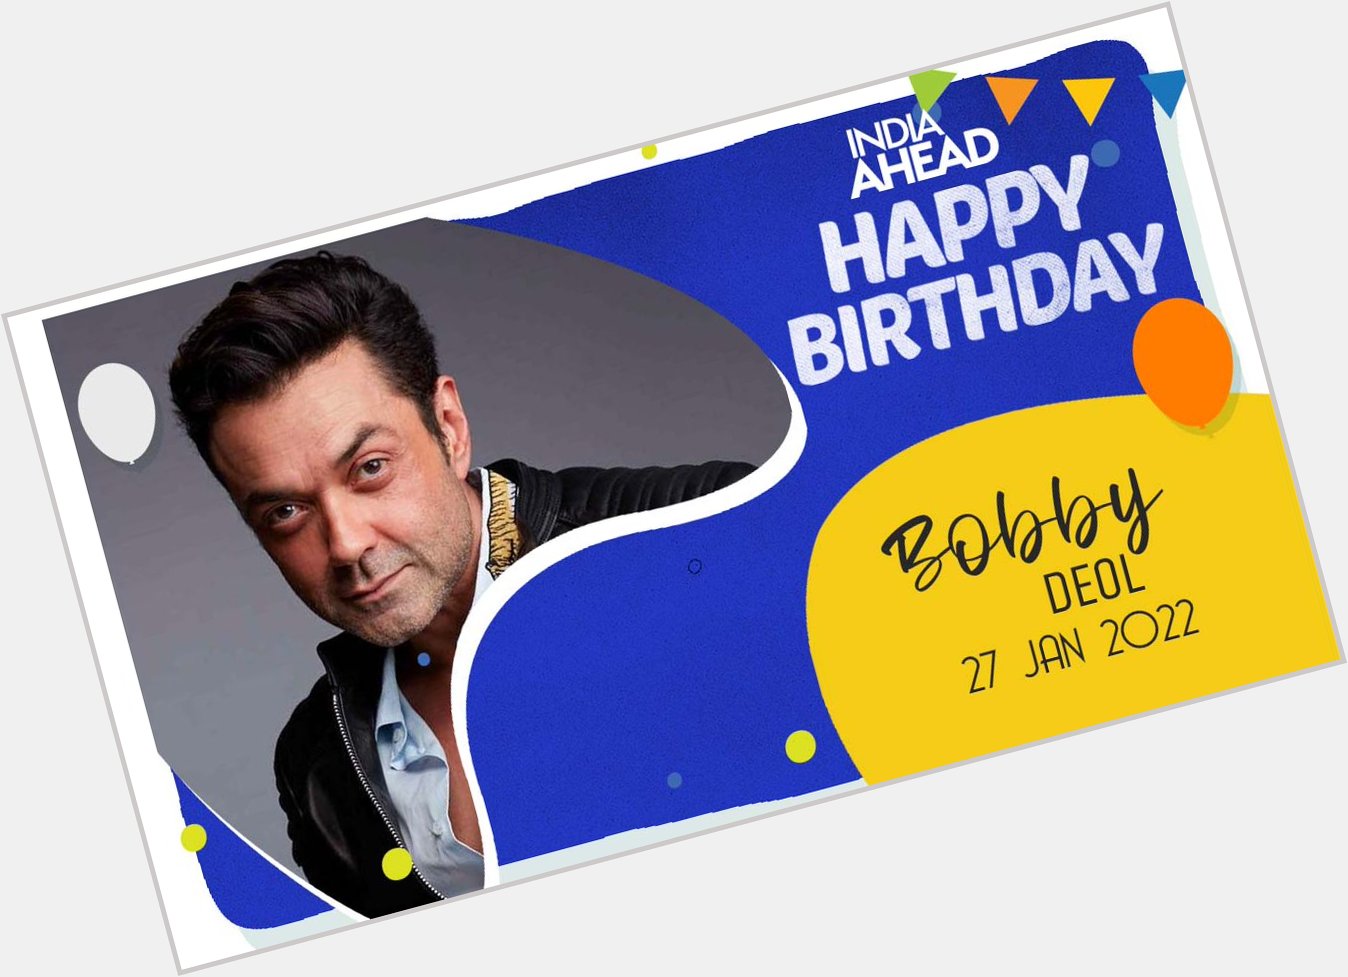 India Ahead wishes a very happy birthday to the talented actor Bobby Deol  